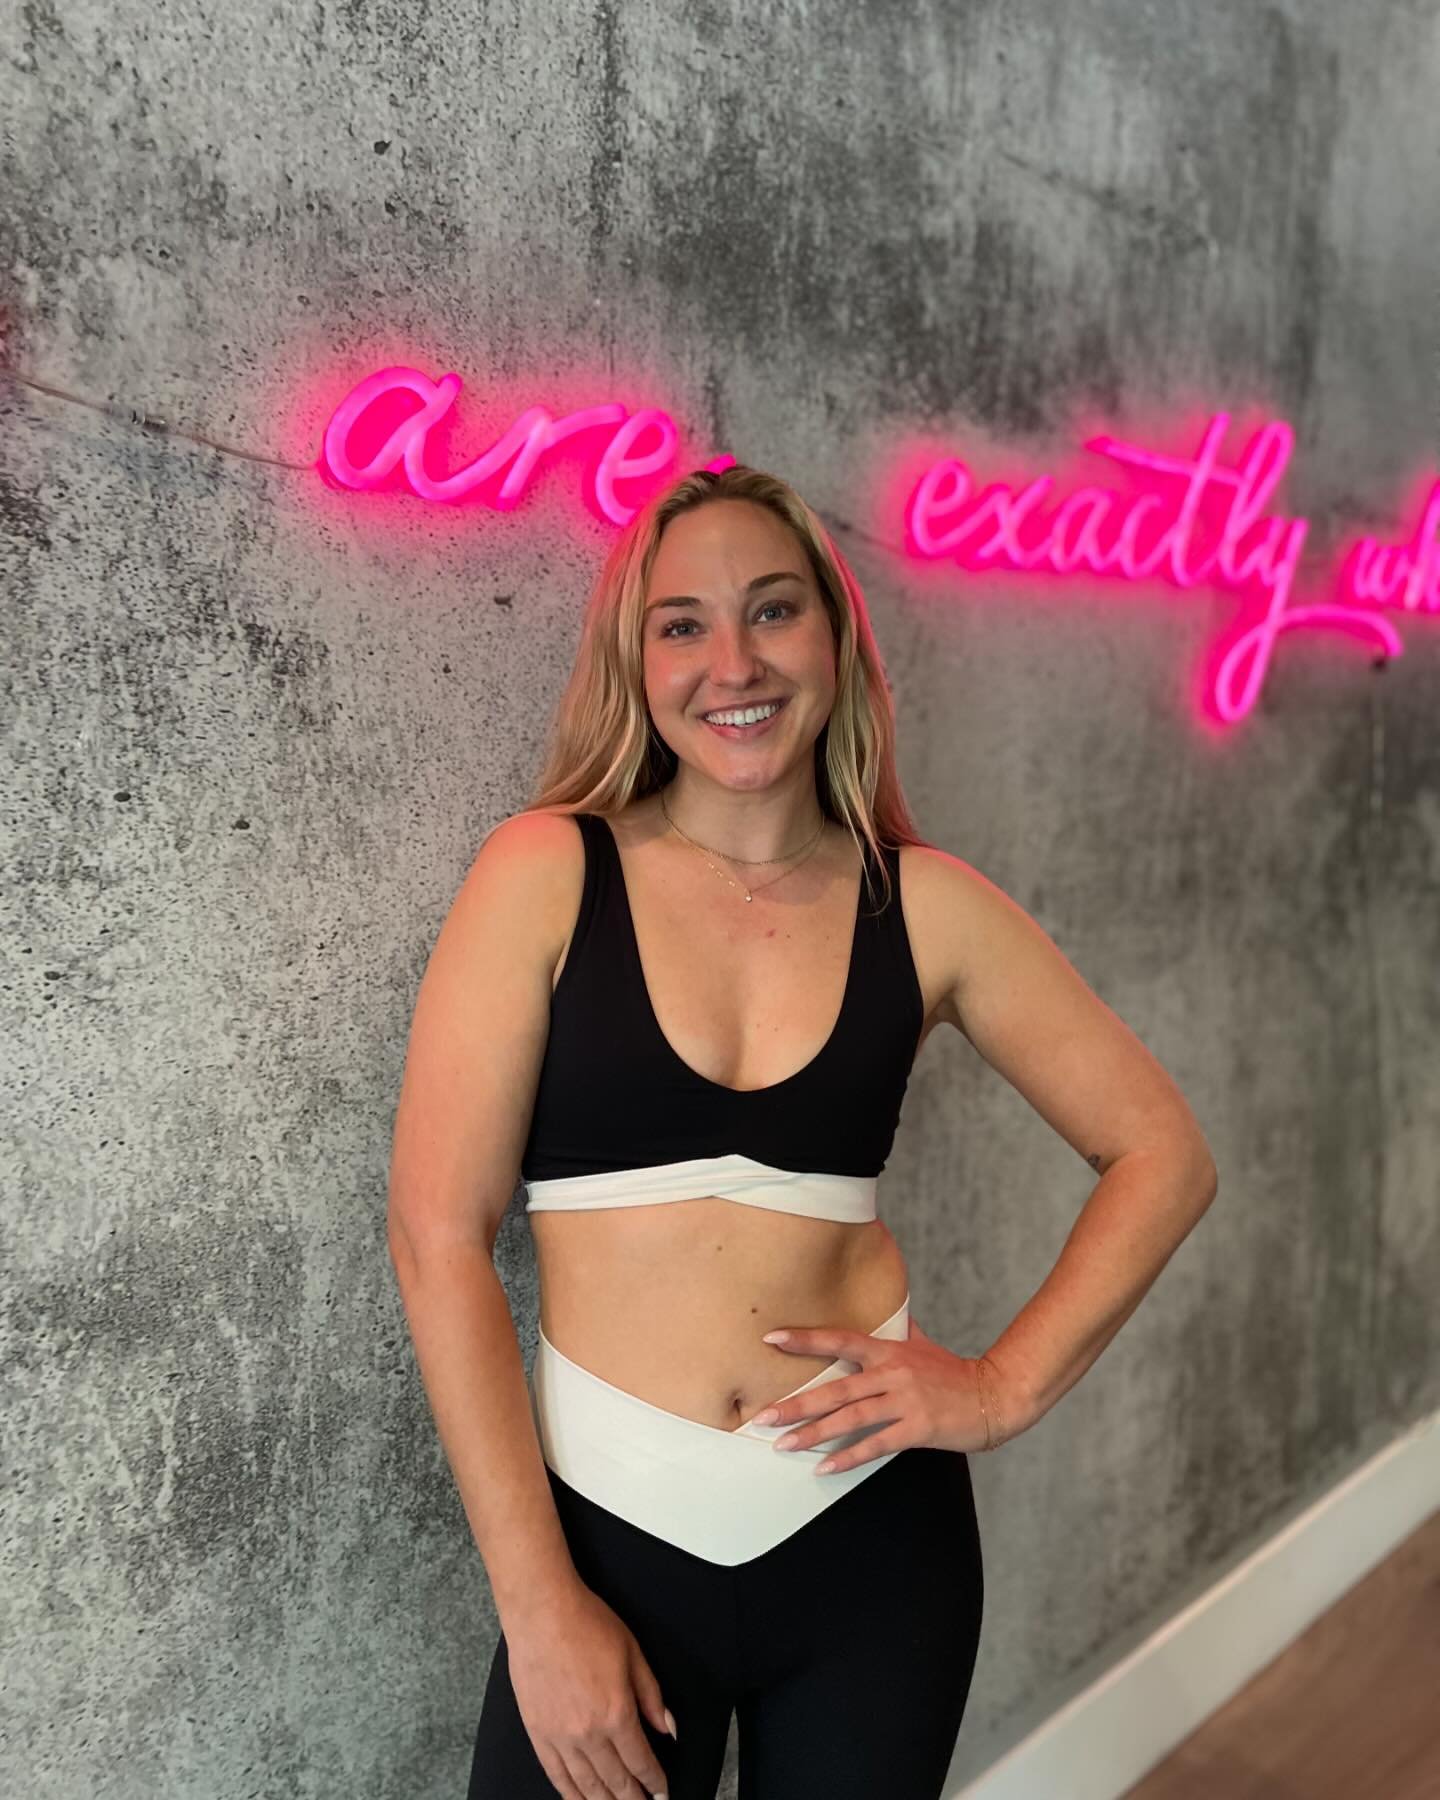 Hi LG Xcrew! Meet @megan.johnson1 , who is starting her instructor journey with her first community classes tomorrow, May 16! A natural on the mic, Megan has been working with Stephanie several times a week over the last couple of months and is ready